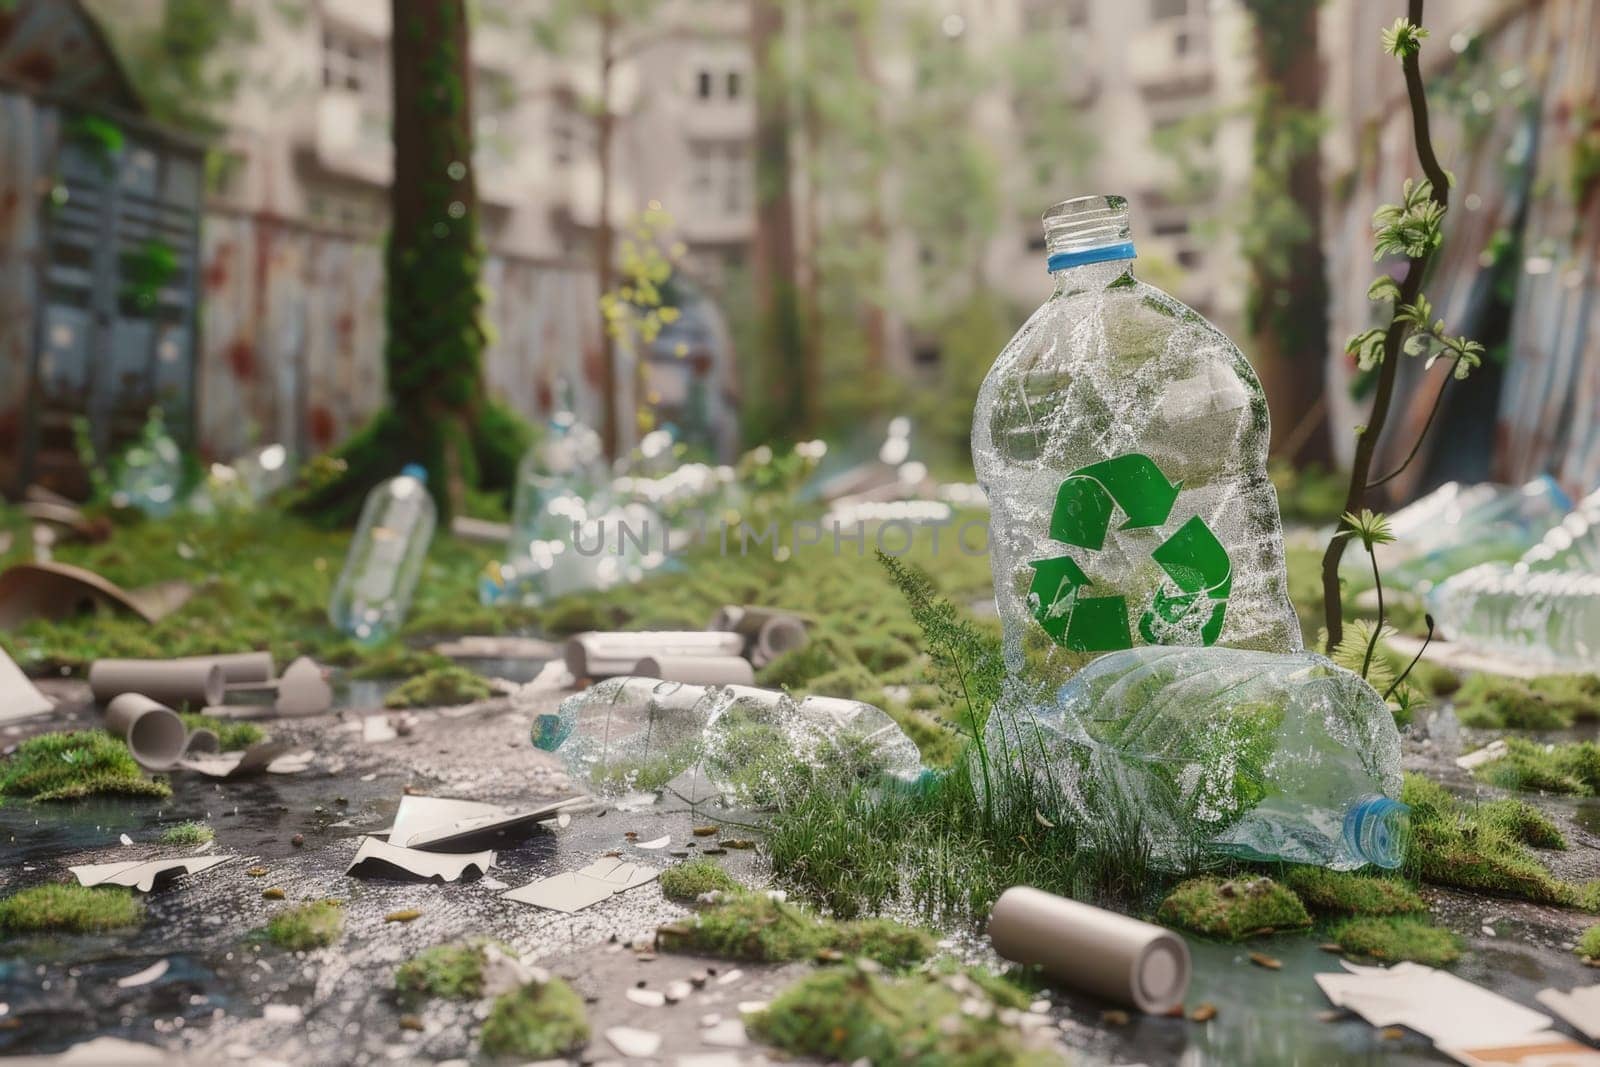 A bottle of water is broken and scattered on the ground. The bottle is surrounded by trash and debris, and the grass is wet. Concept of neglect and pollution, as the bottle